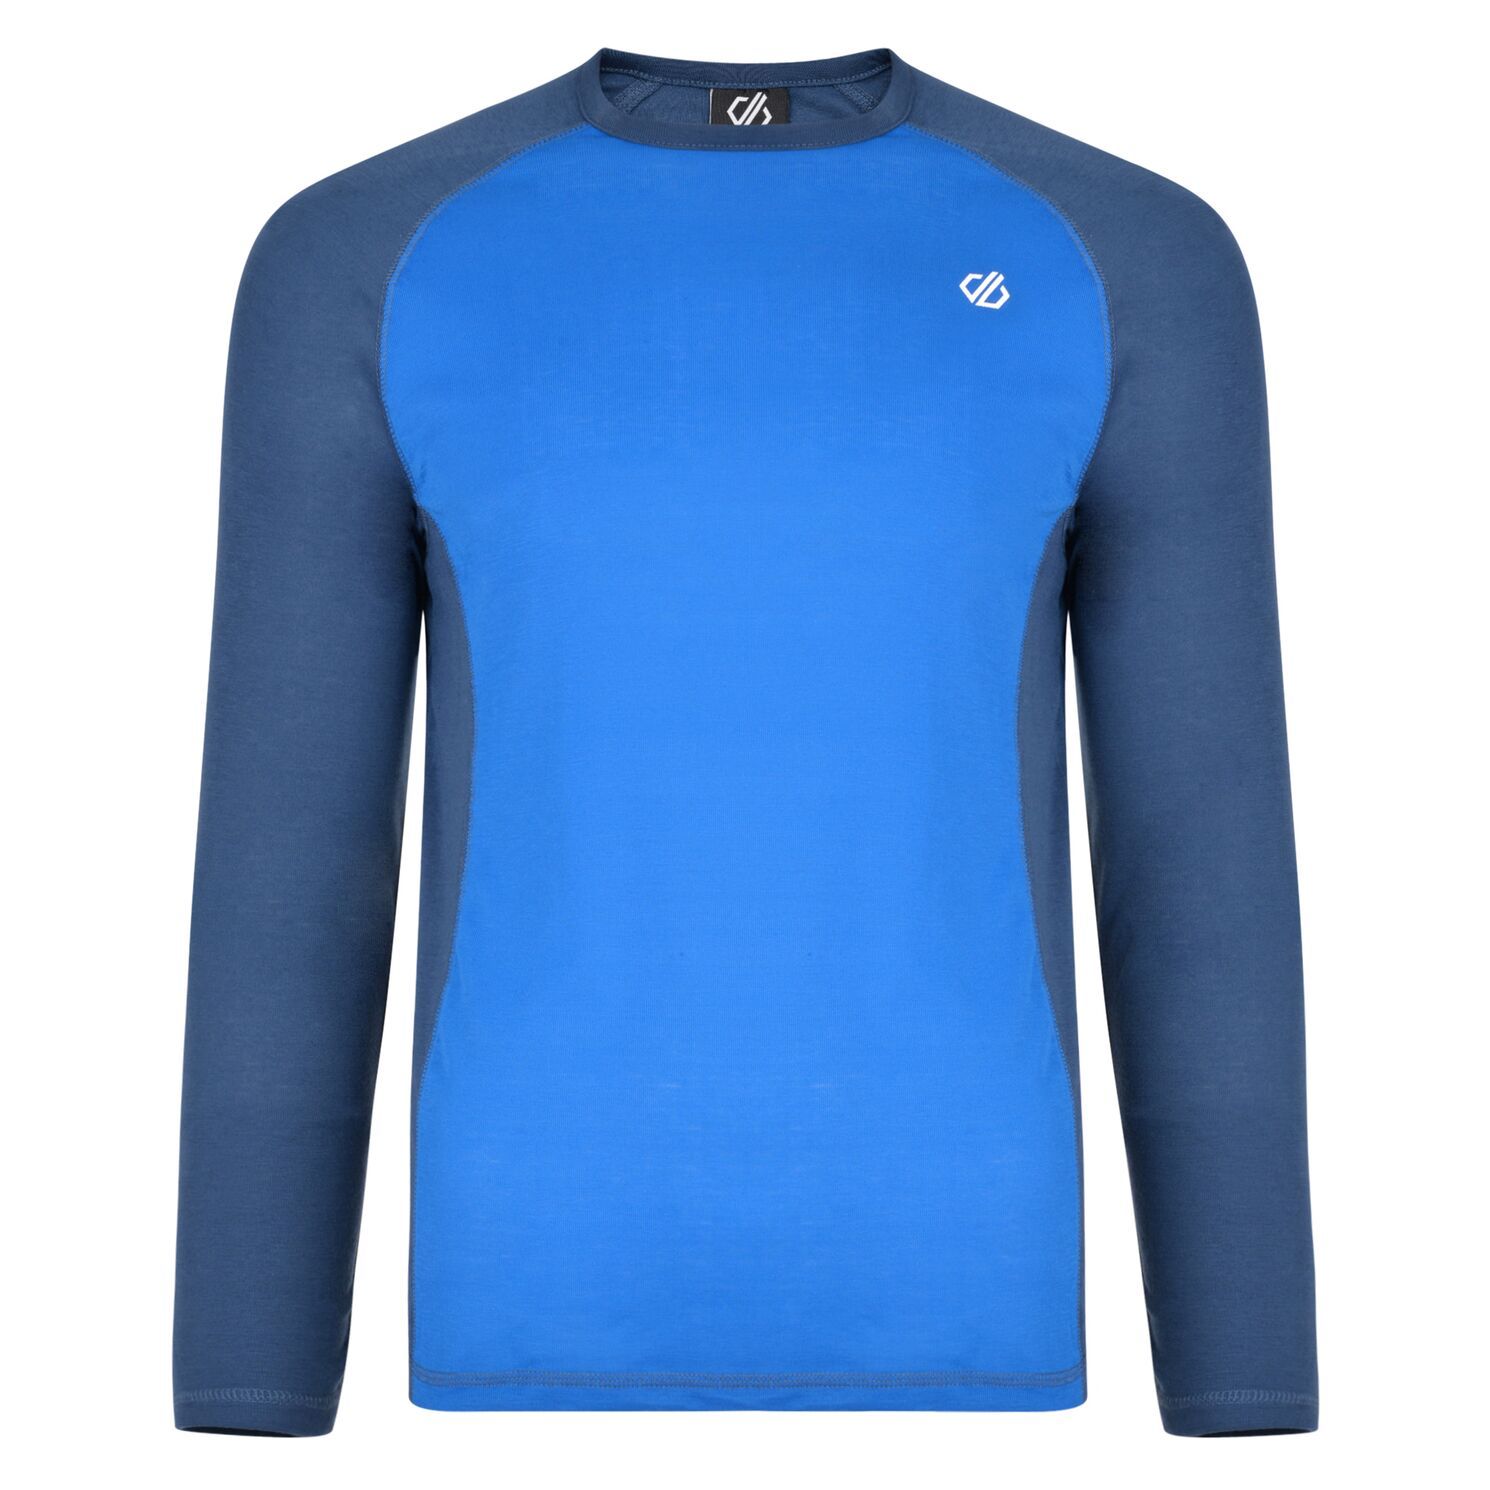 Material: polyester: 100%. Thermal base layer collection. Q-Wic Plus 100% polyester brushed back thermal fabric. Fast wicking and quick drying properties. Odour control treatment. Moves moisture away from the skin and absorbs odour. Keeps you feeling warm and fresh.